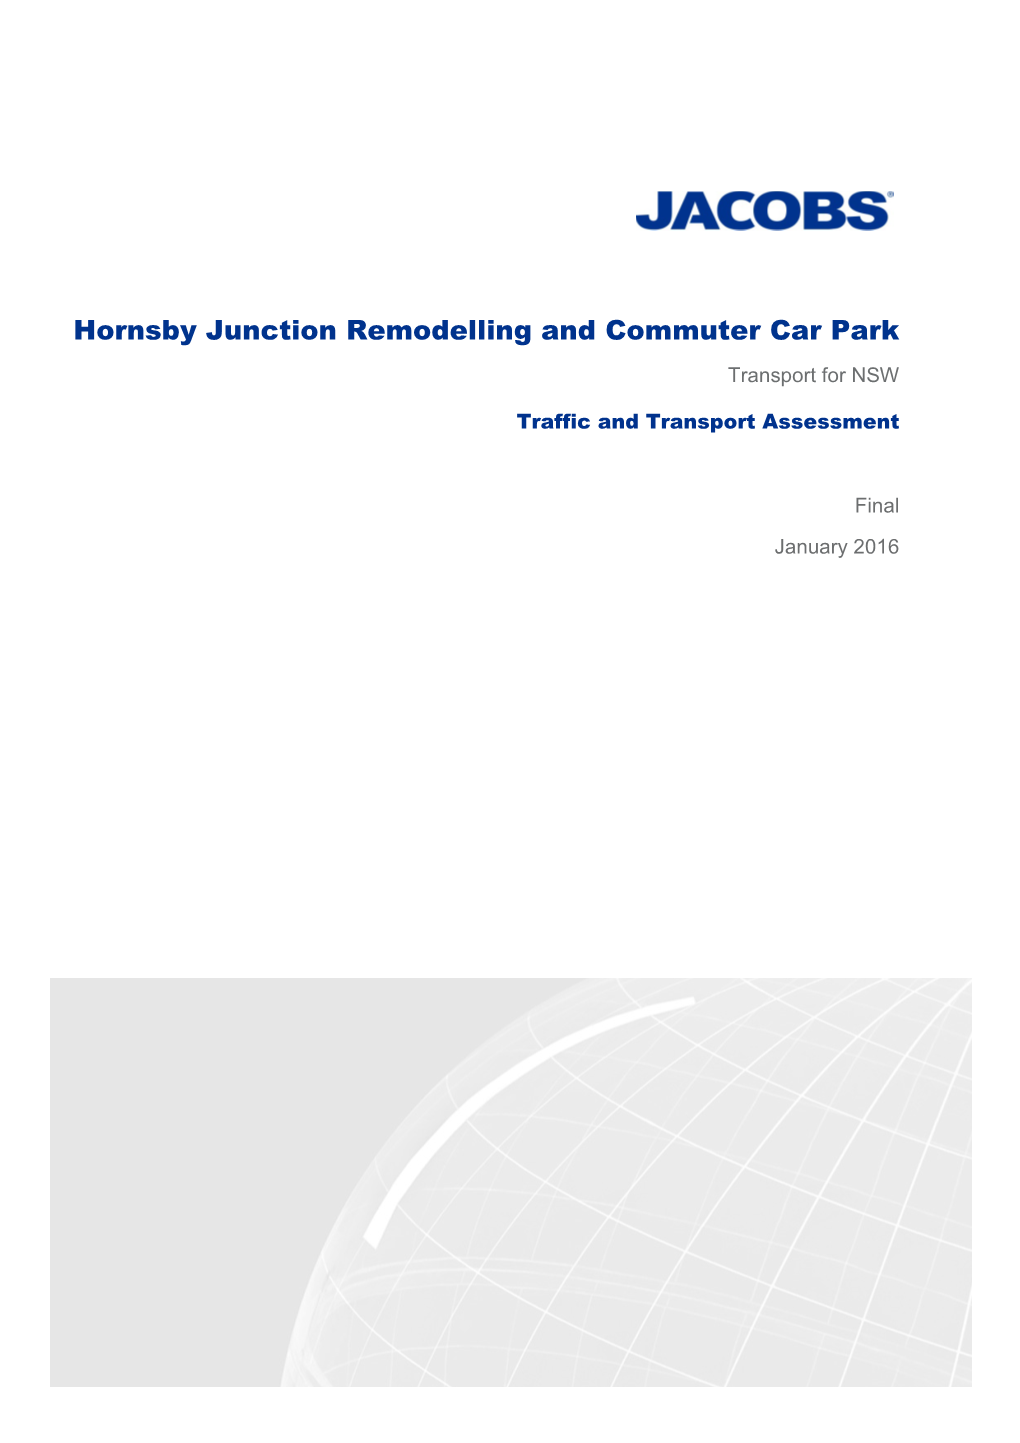 Hornsby Junction Remodelling and Commuter Car Park Transport for NSW